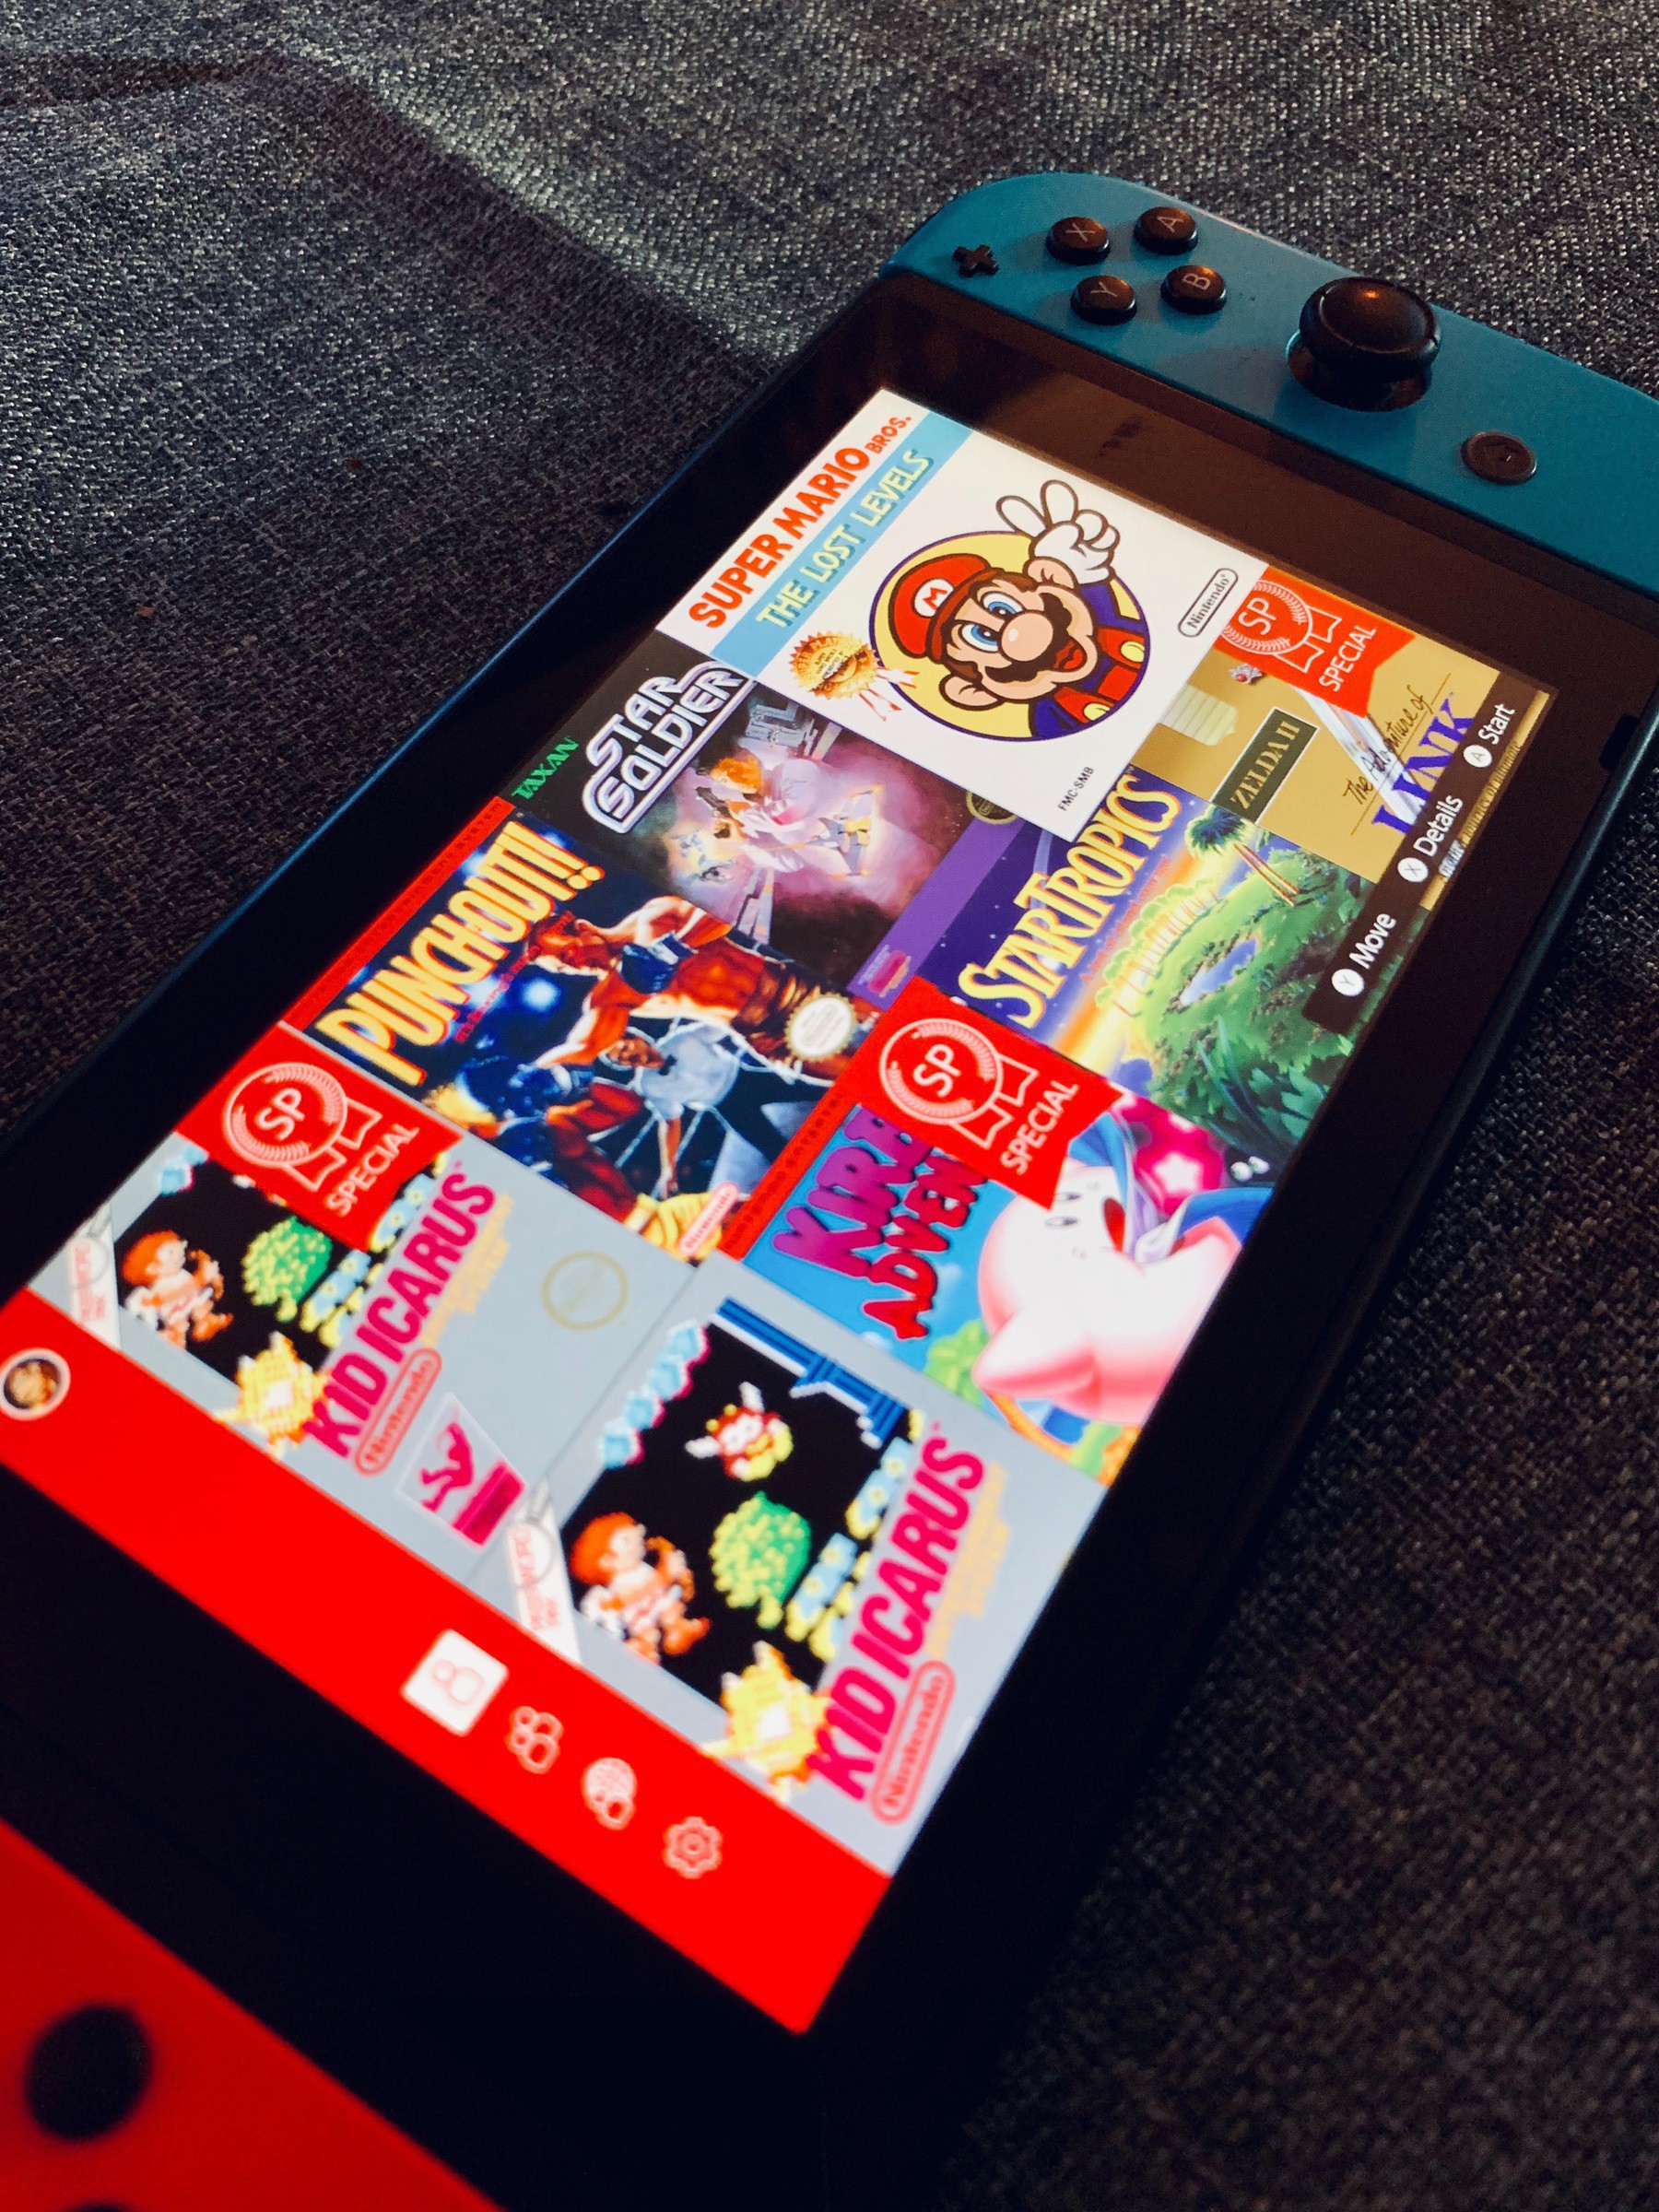 NES Games Library on Nintendo Switch